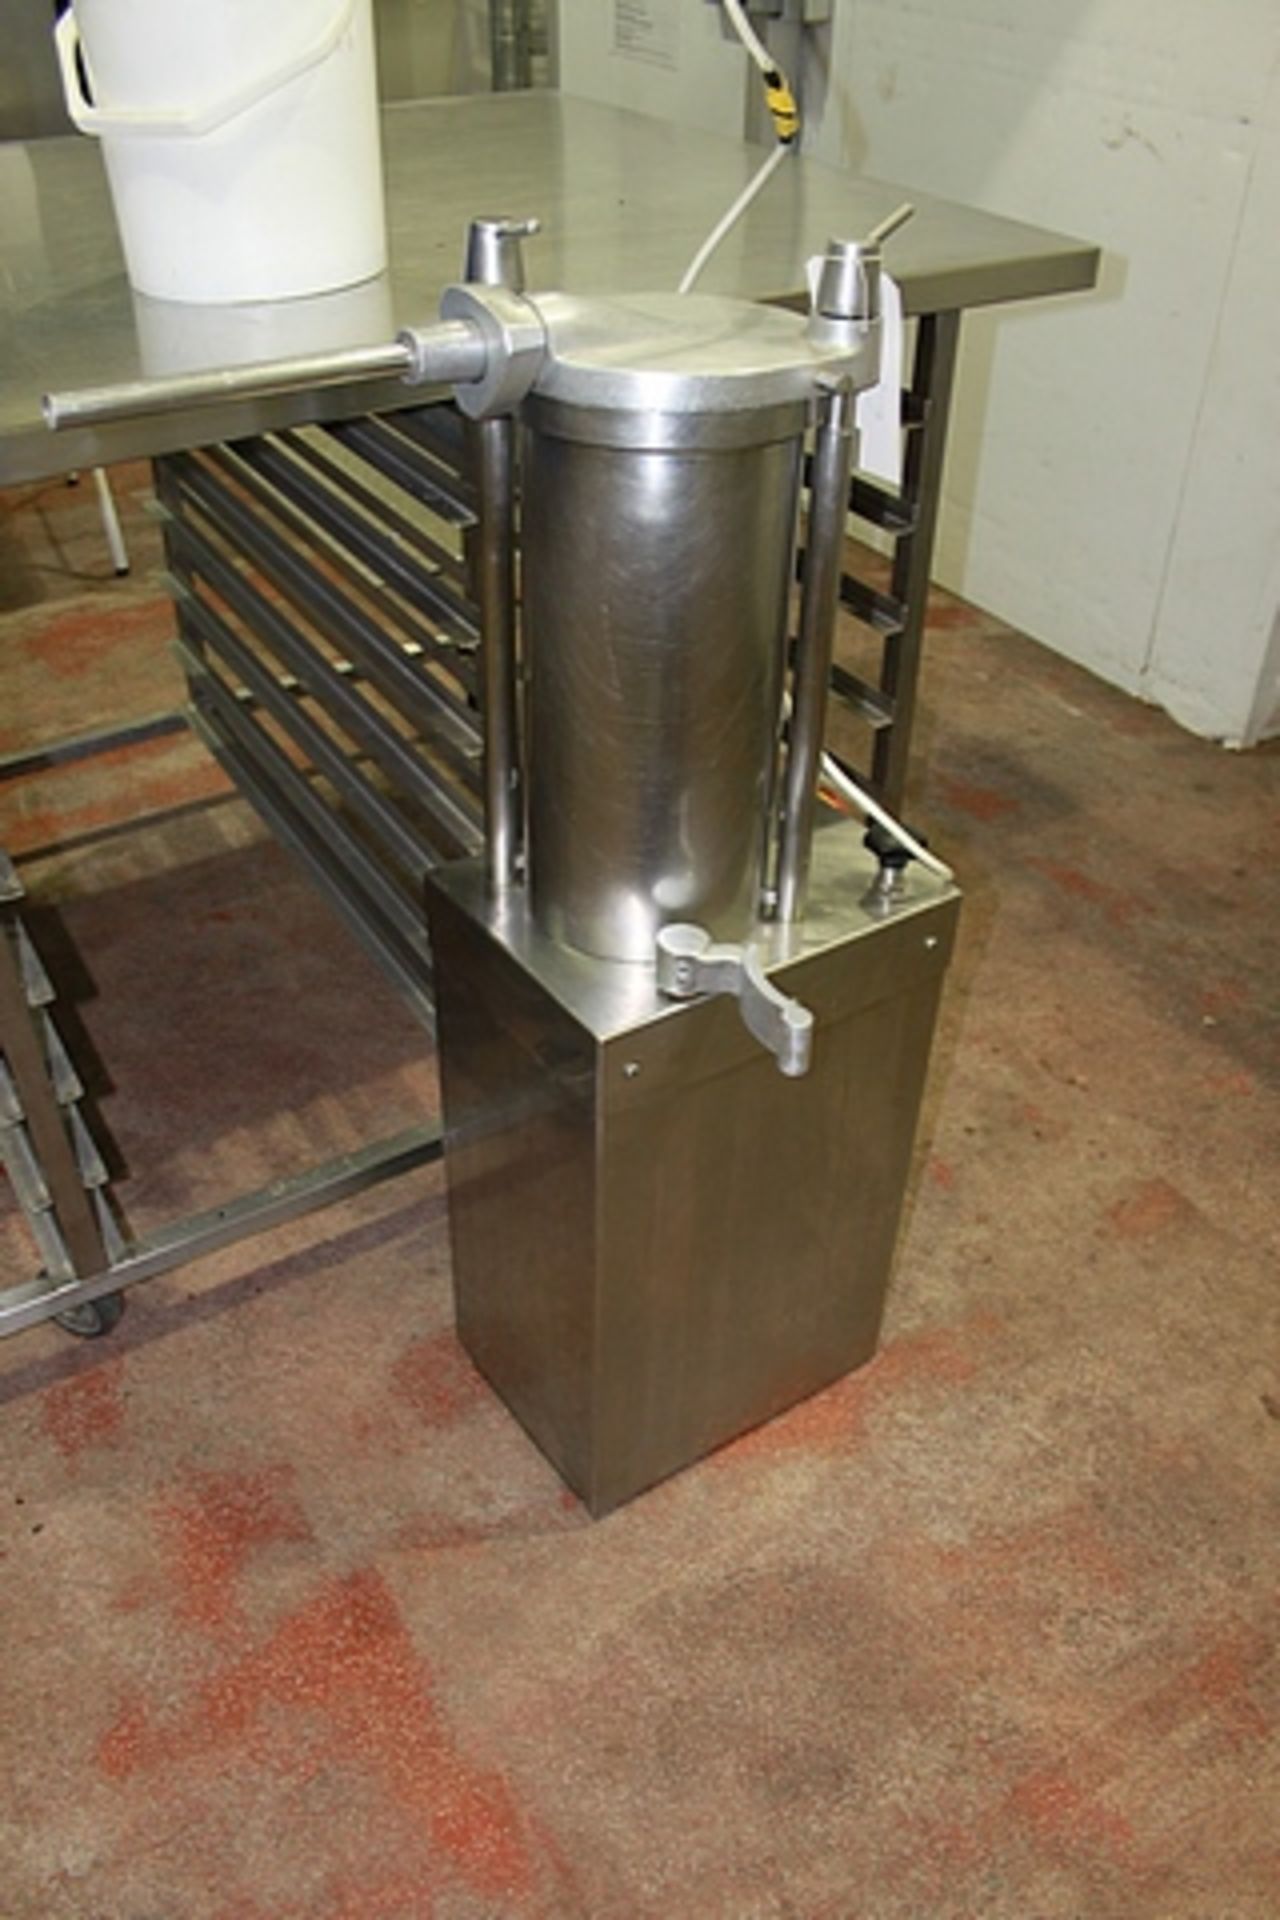 Stainless steel hydraulic filler stuffer fixed barrel standard model with cover and piston in - Image 2 of 2